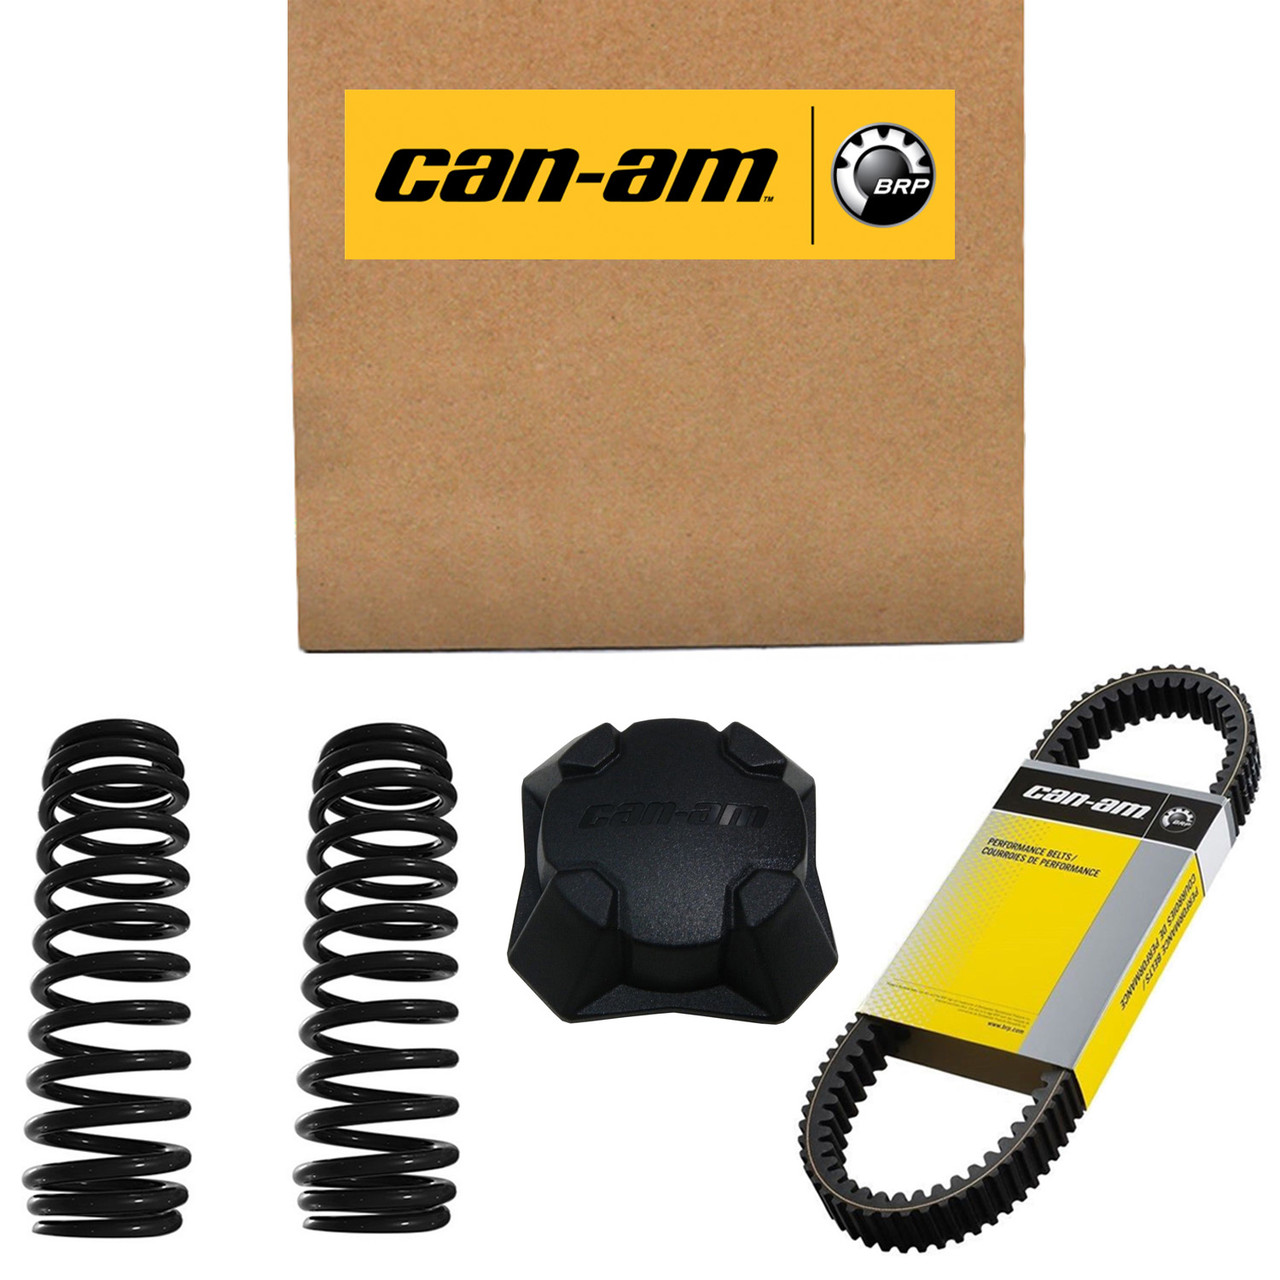 Can-Am New OEM Gear Set, 420281151